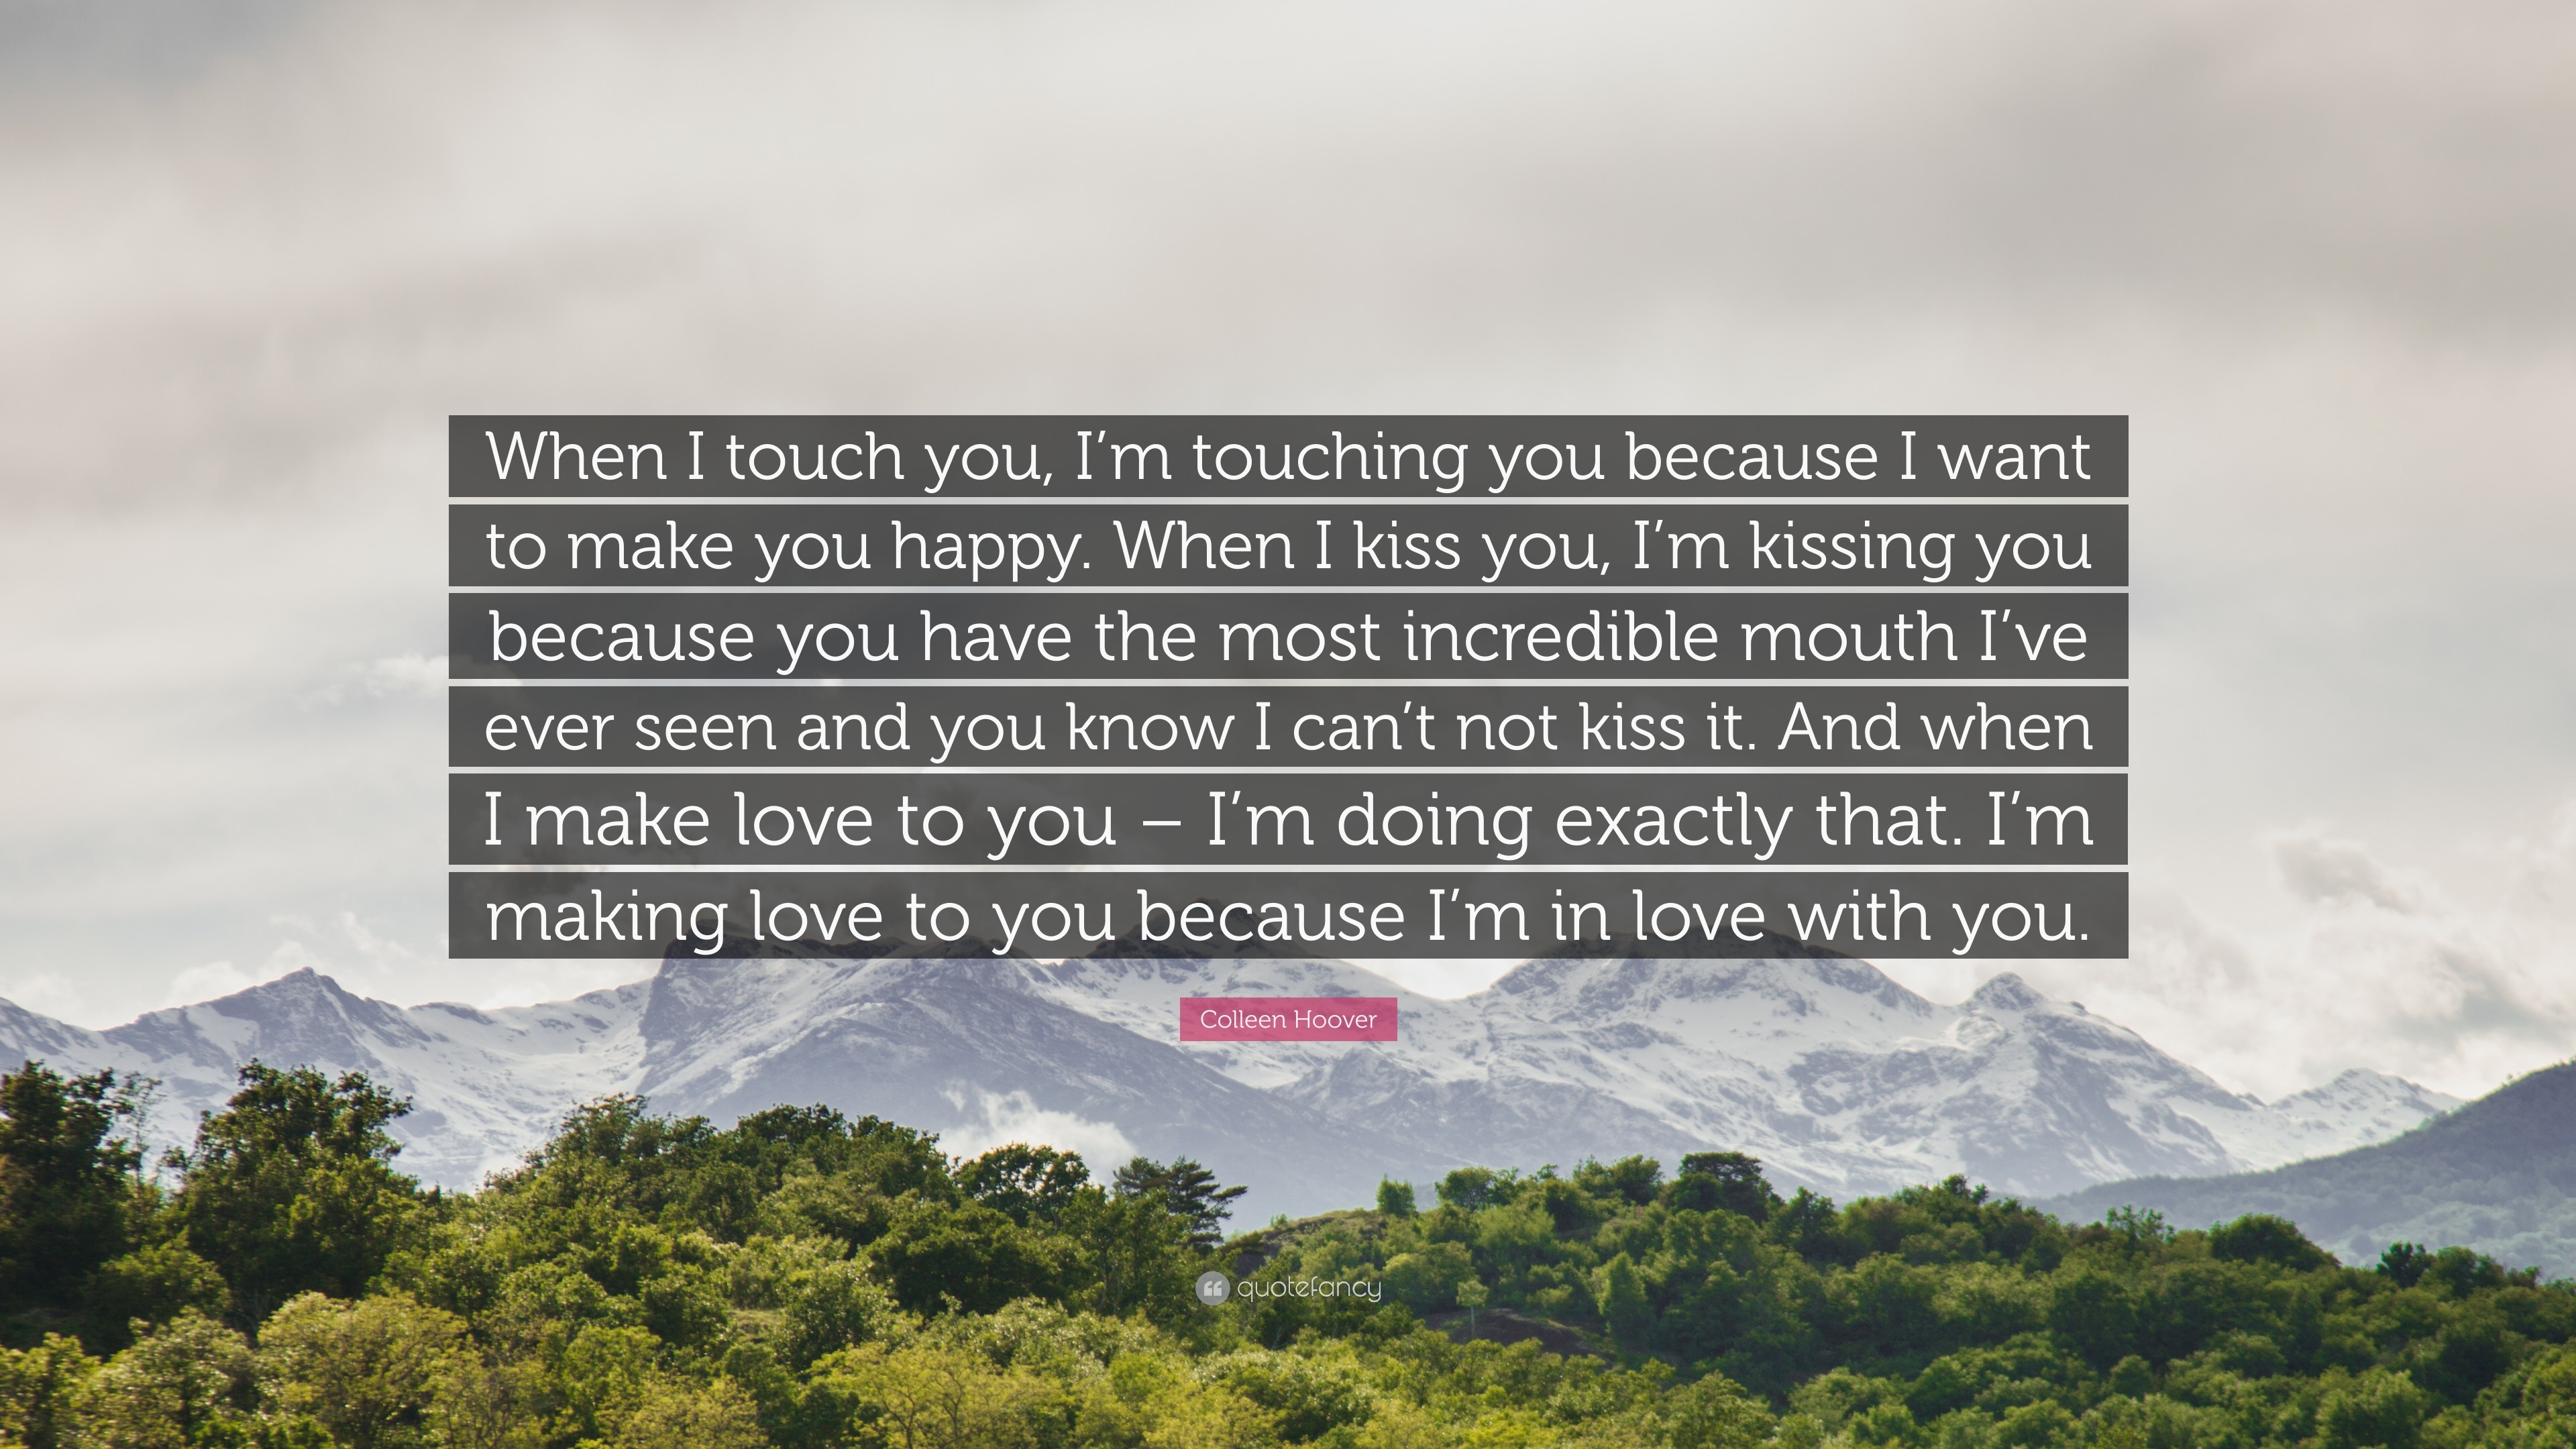 Colleen Hoover Quote “When I touch you I m touching you because